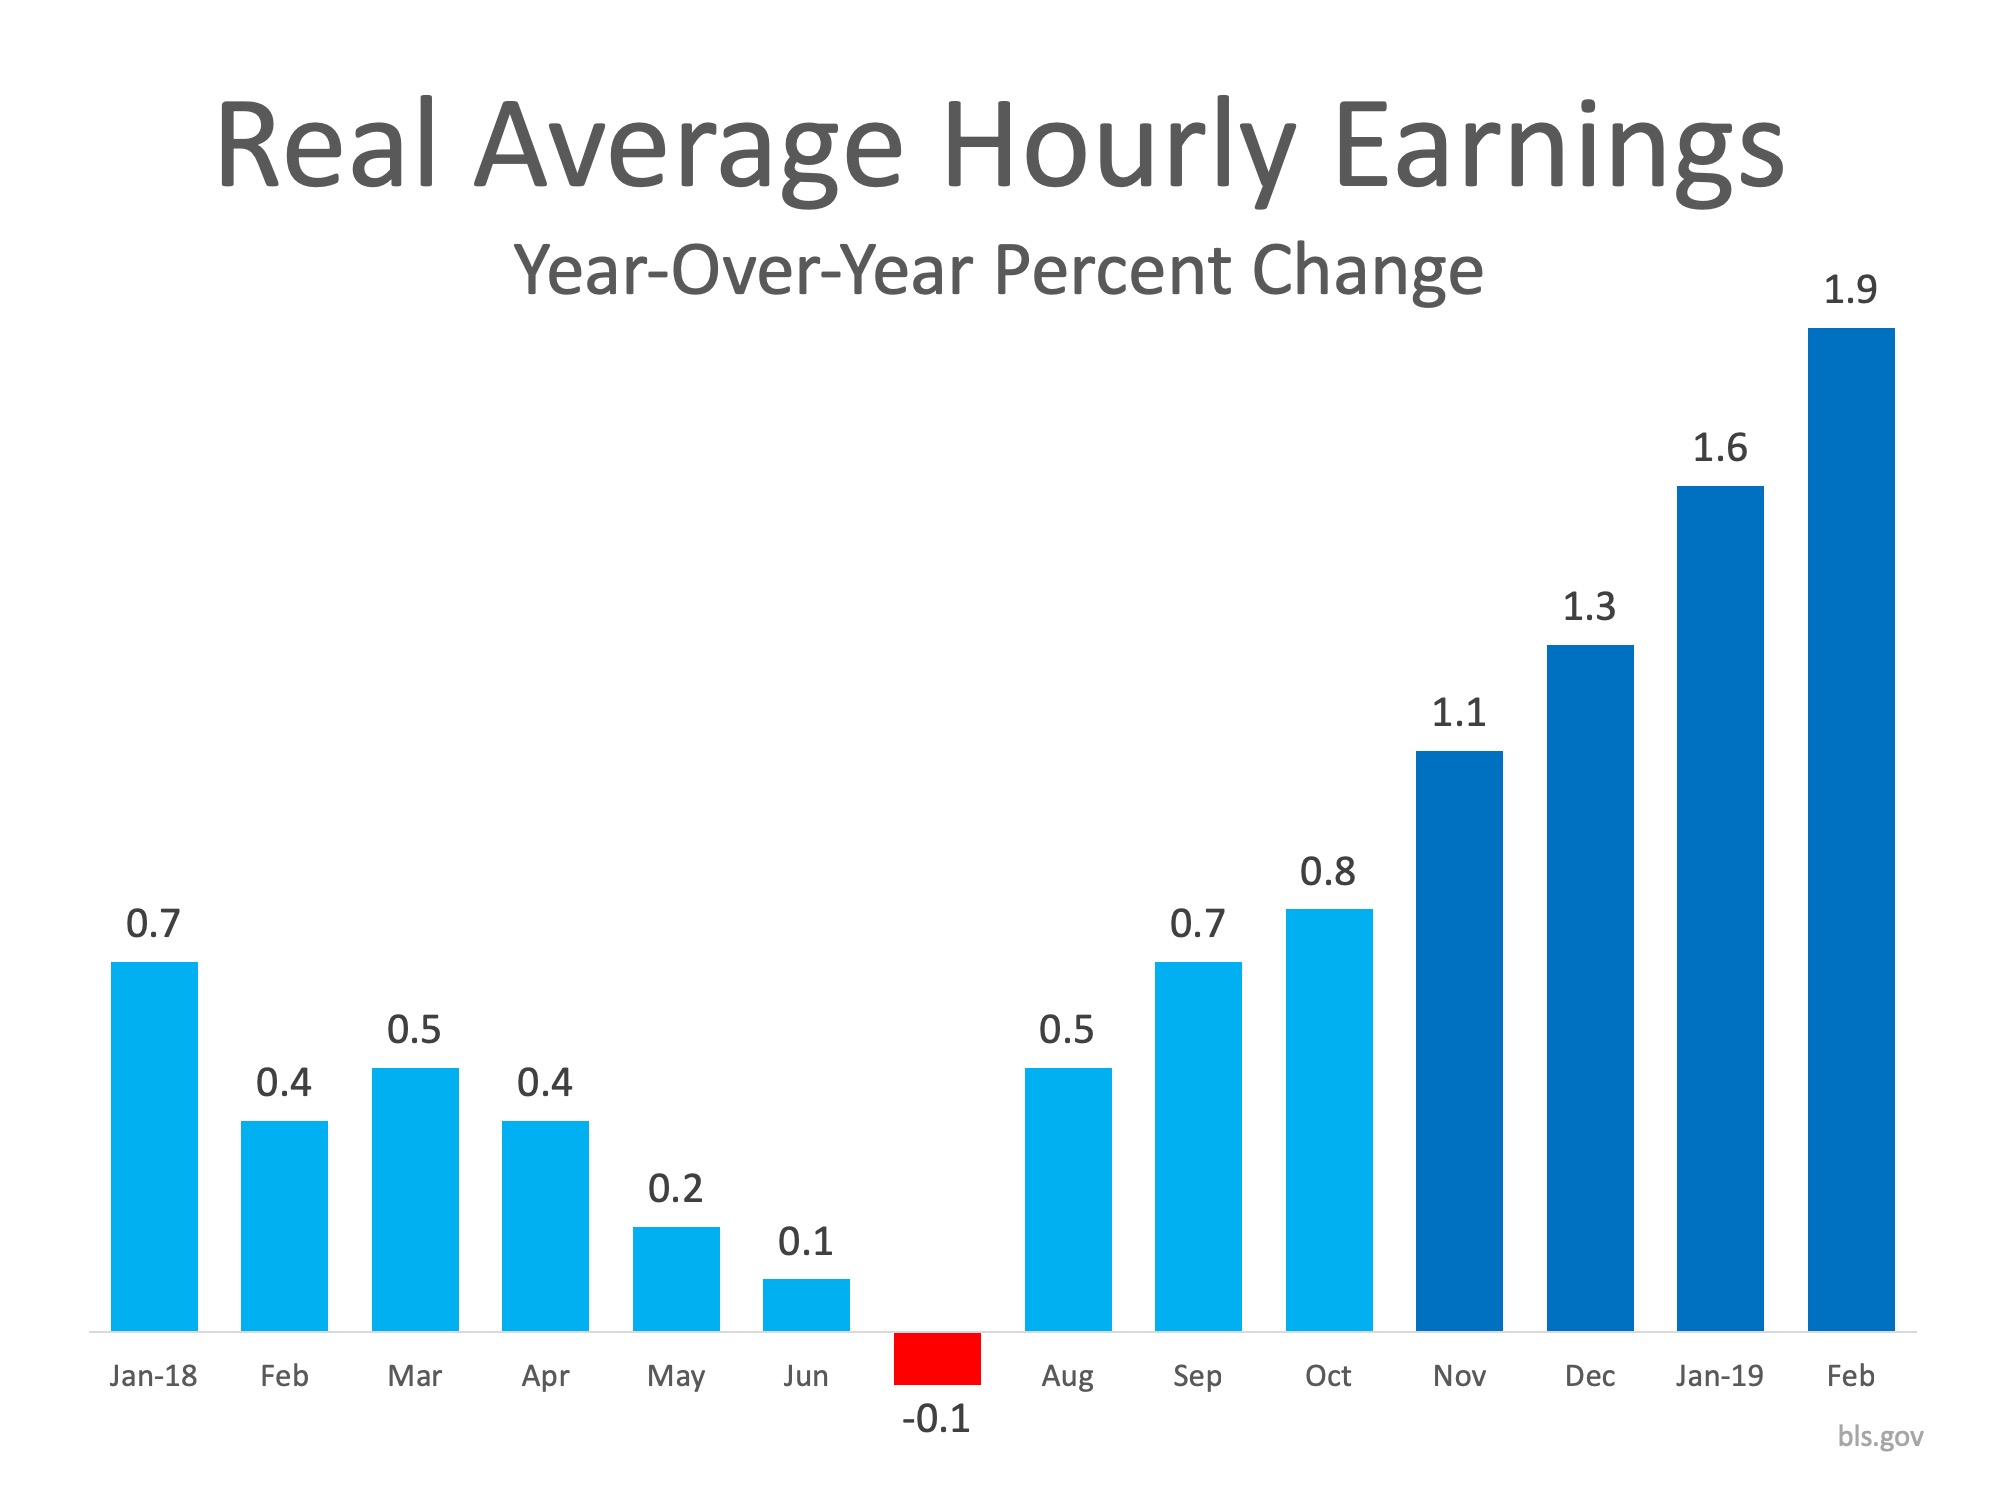 Real average hourly earning year-over-year percent change infographic